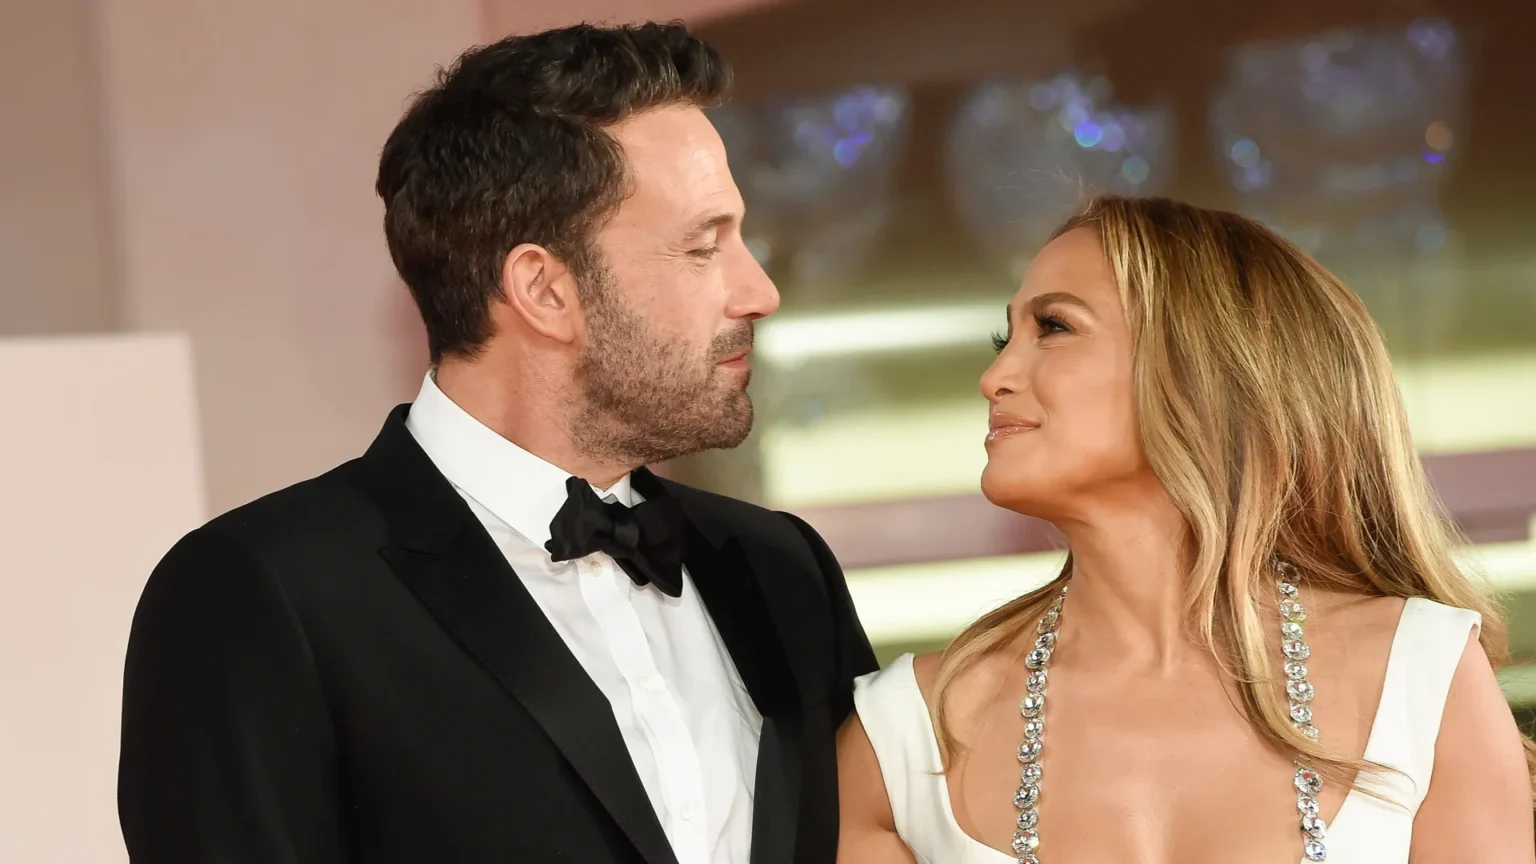 ben-affleck-and-jennifer-lopez-encounter-the-harsh-reality-of-marriage-following-honeymoon-phase